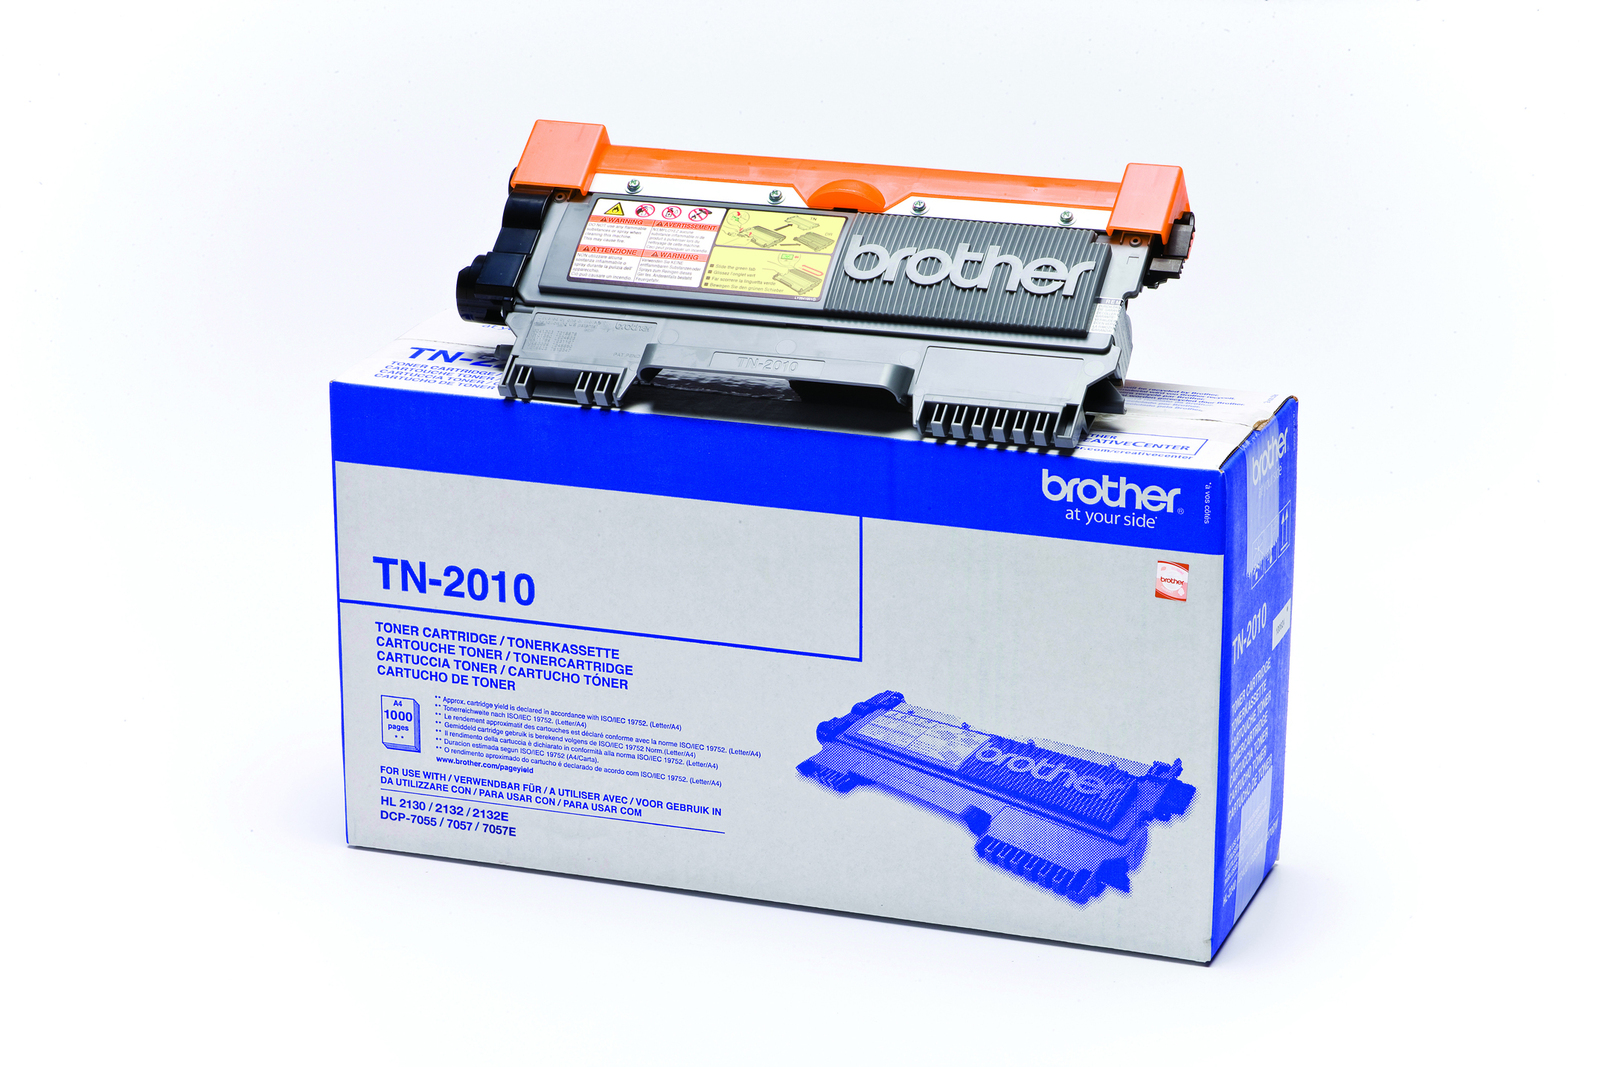 Compatible TN-2010 Brother toner Black  for ΤΝ2010/ ΤΝ2030/ ΤΝ2060/ DCP-7055/ 7057/ HL-2030/ 2032/ 2135